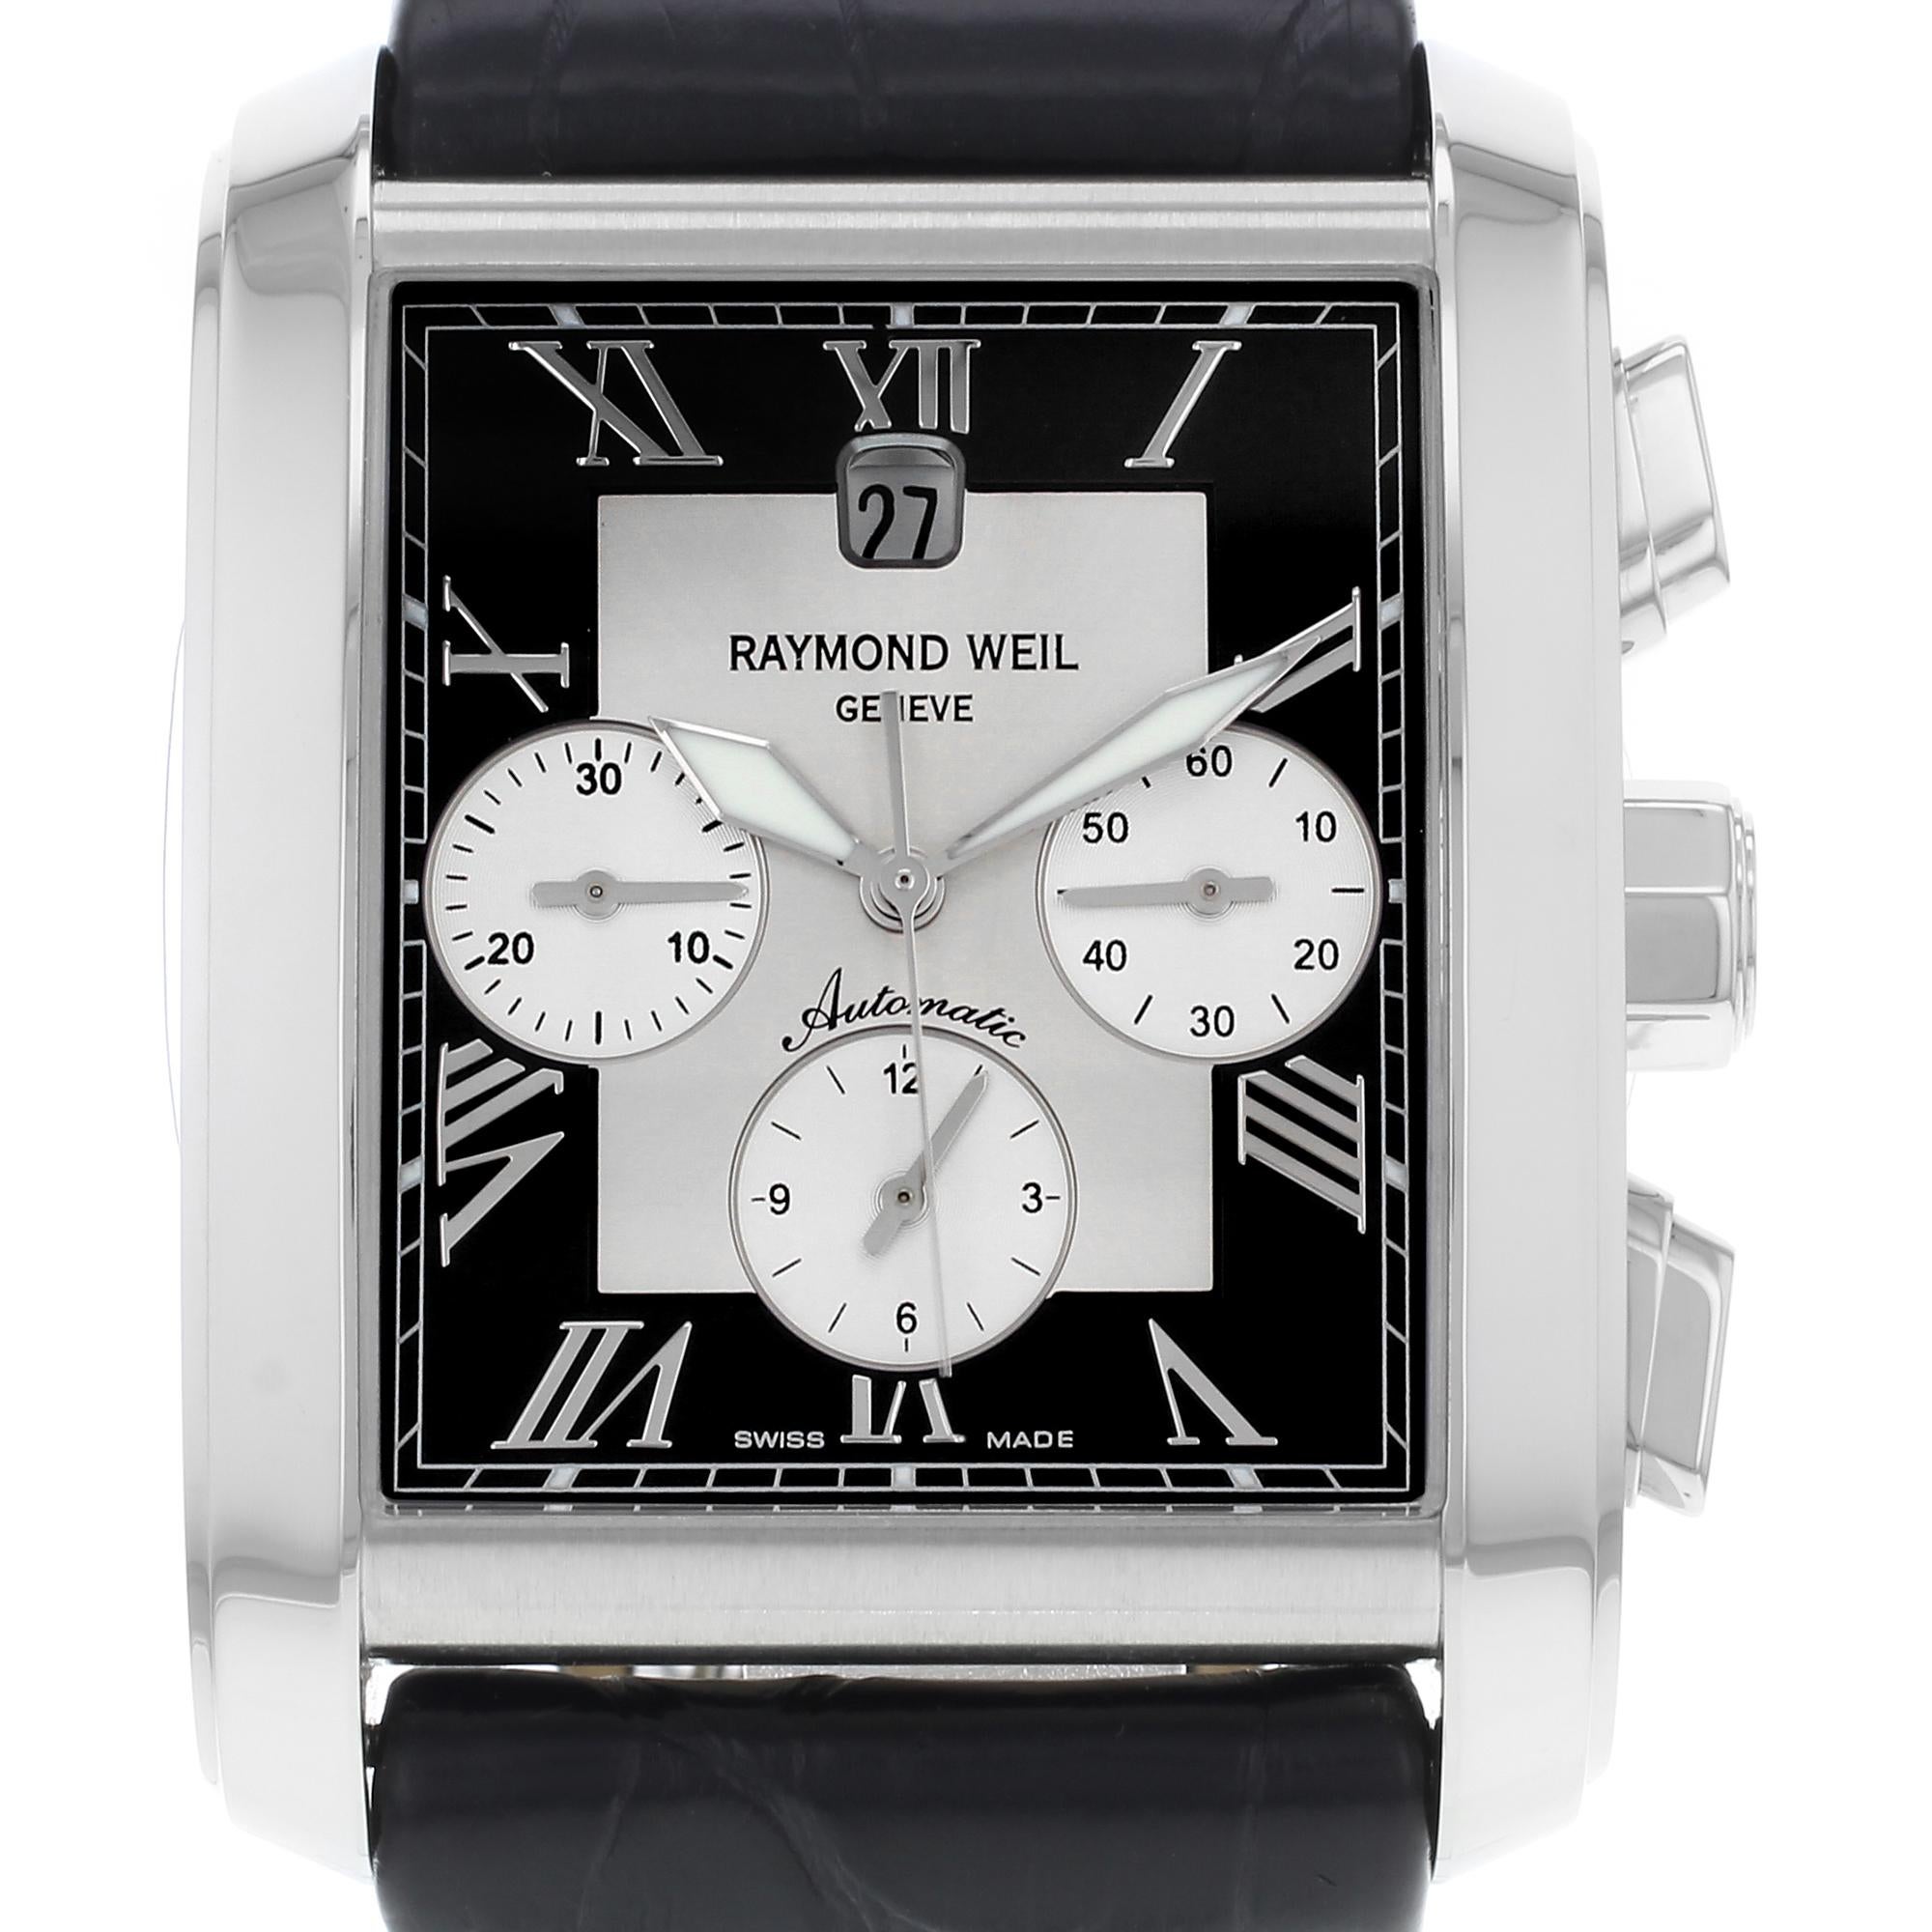 This display model Raymond Weil Don Giovanni 4878-STC-00668 is a beautiful men's timepiece that is powered by an automatic movement which is cased in a stainless steel case. It has a square shape face, chronograph, date, small seconds subdial dial